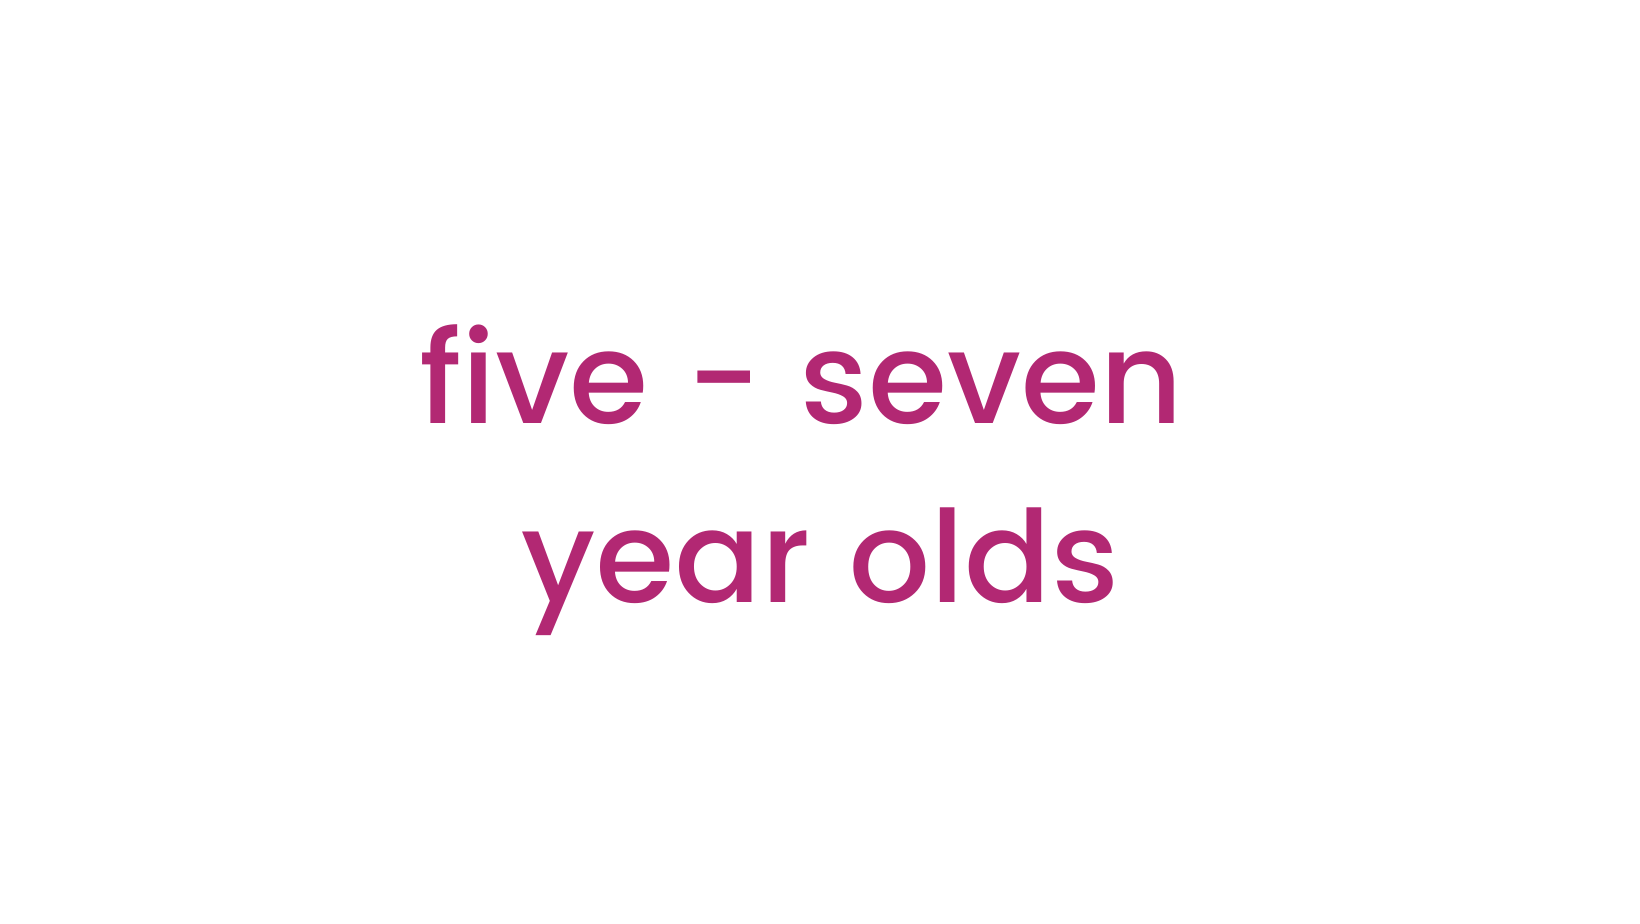 five - seven year olds